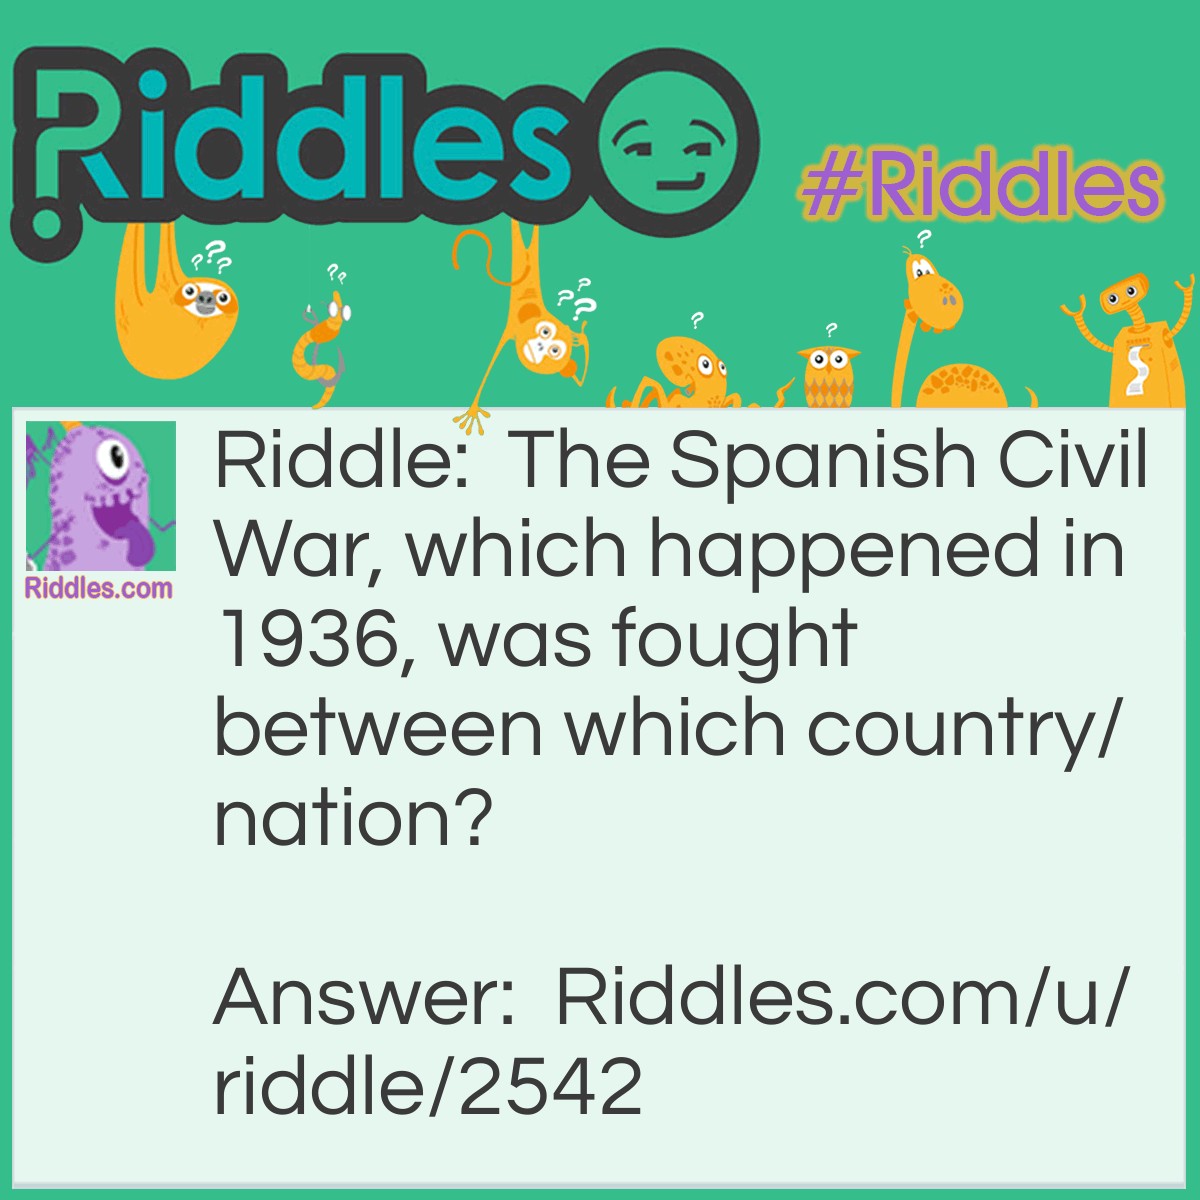 Riddle: The Spanish Civil War, which happened in 1936, was fought between which country/nation? Answer: It was fought against their own country since it was a Civil War.